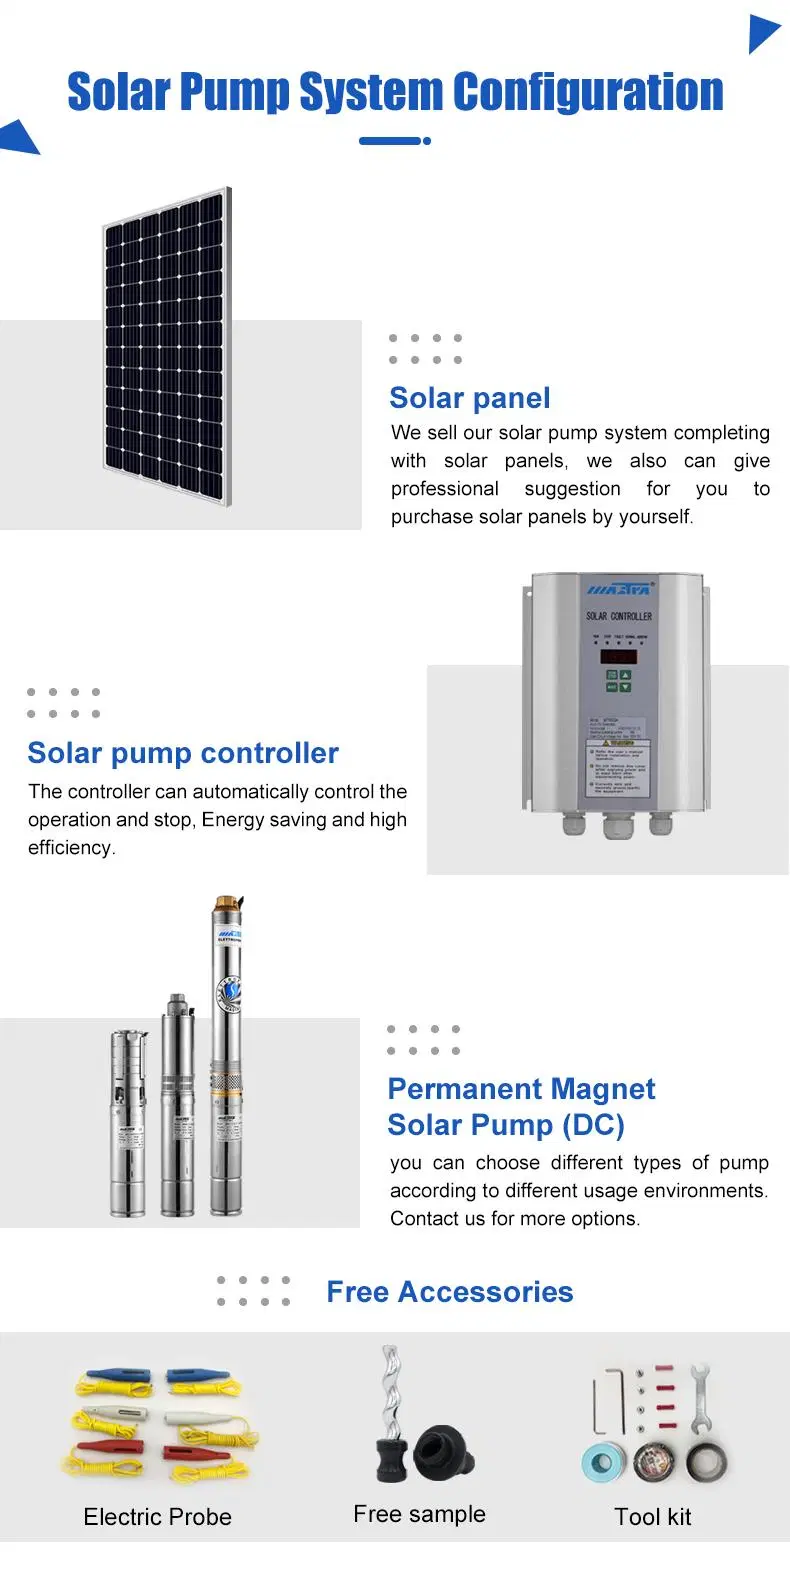 Mastra 3 Inch 400W Italy Stainless Steel Solar Submersible Pumping Controller System Solar Water Pump Kit